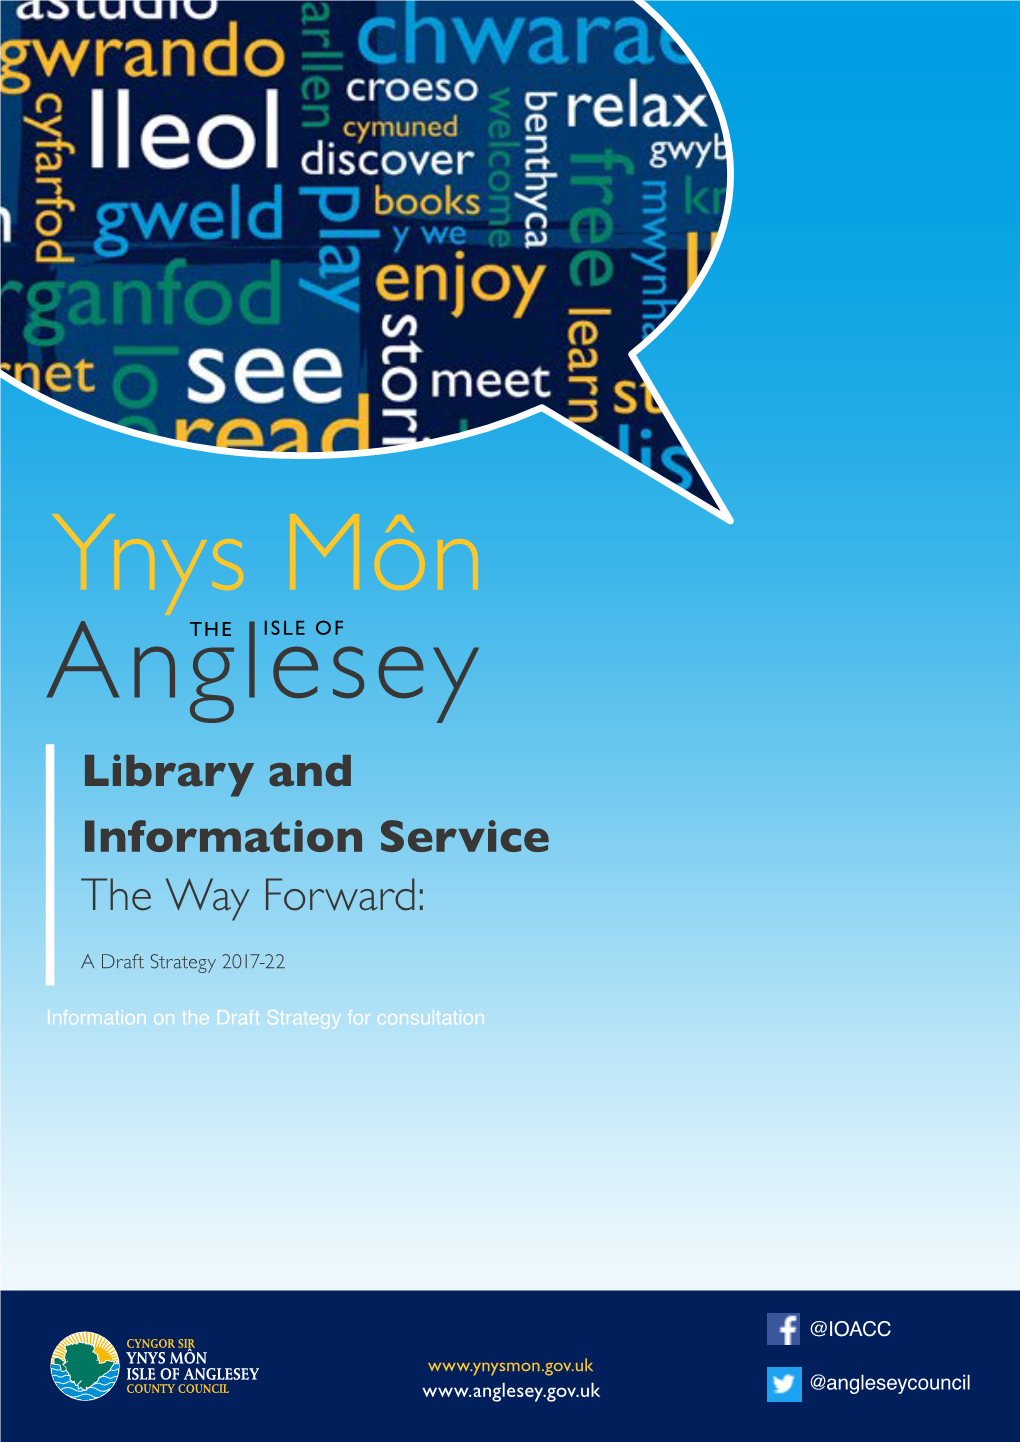 Ynys Môn Angleseythe ISLE of Library and Information Service the Way Forward